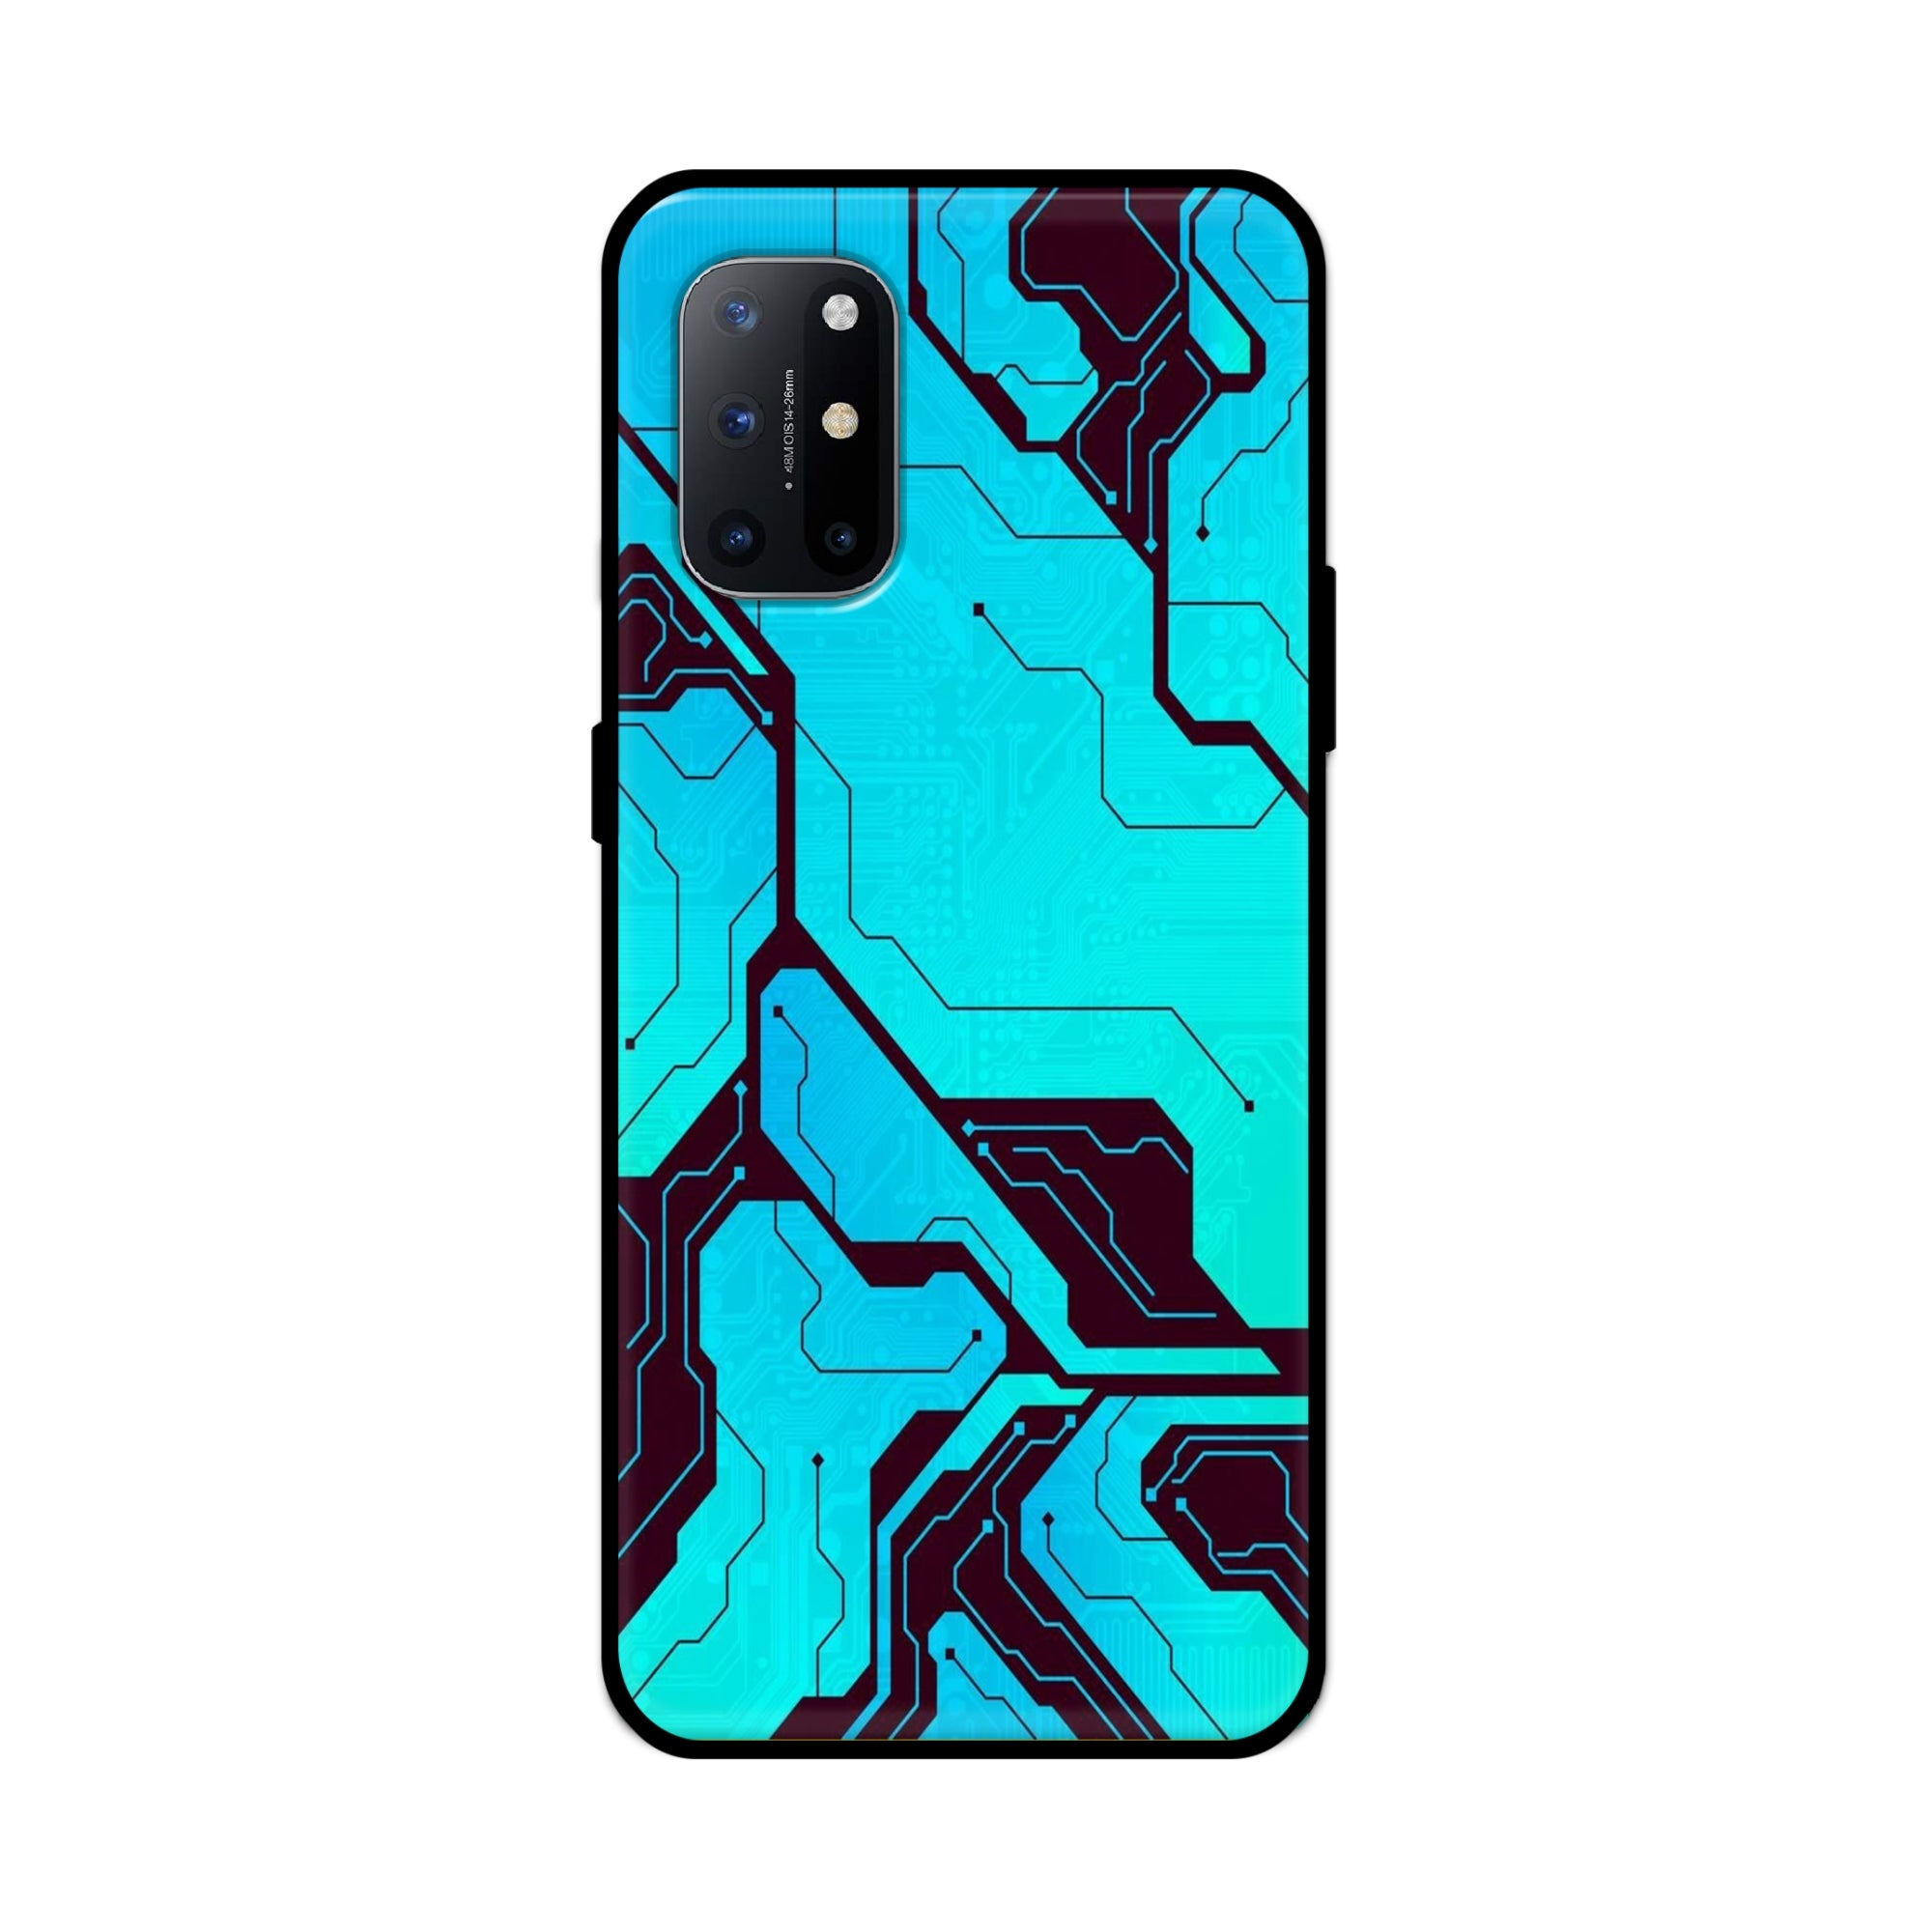 Buy Futuristic Line Metal-Silicon Back Mobile Phone Case/Cover For Oneplus 9R / 8T Online